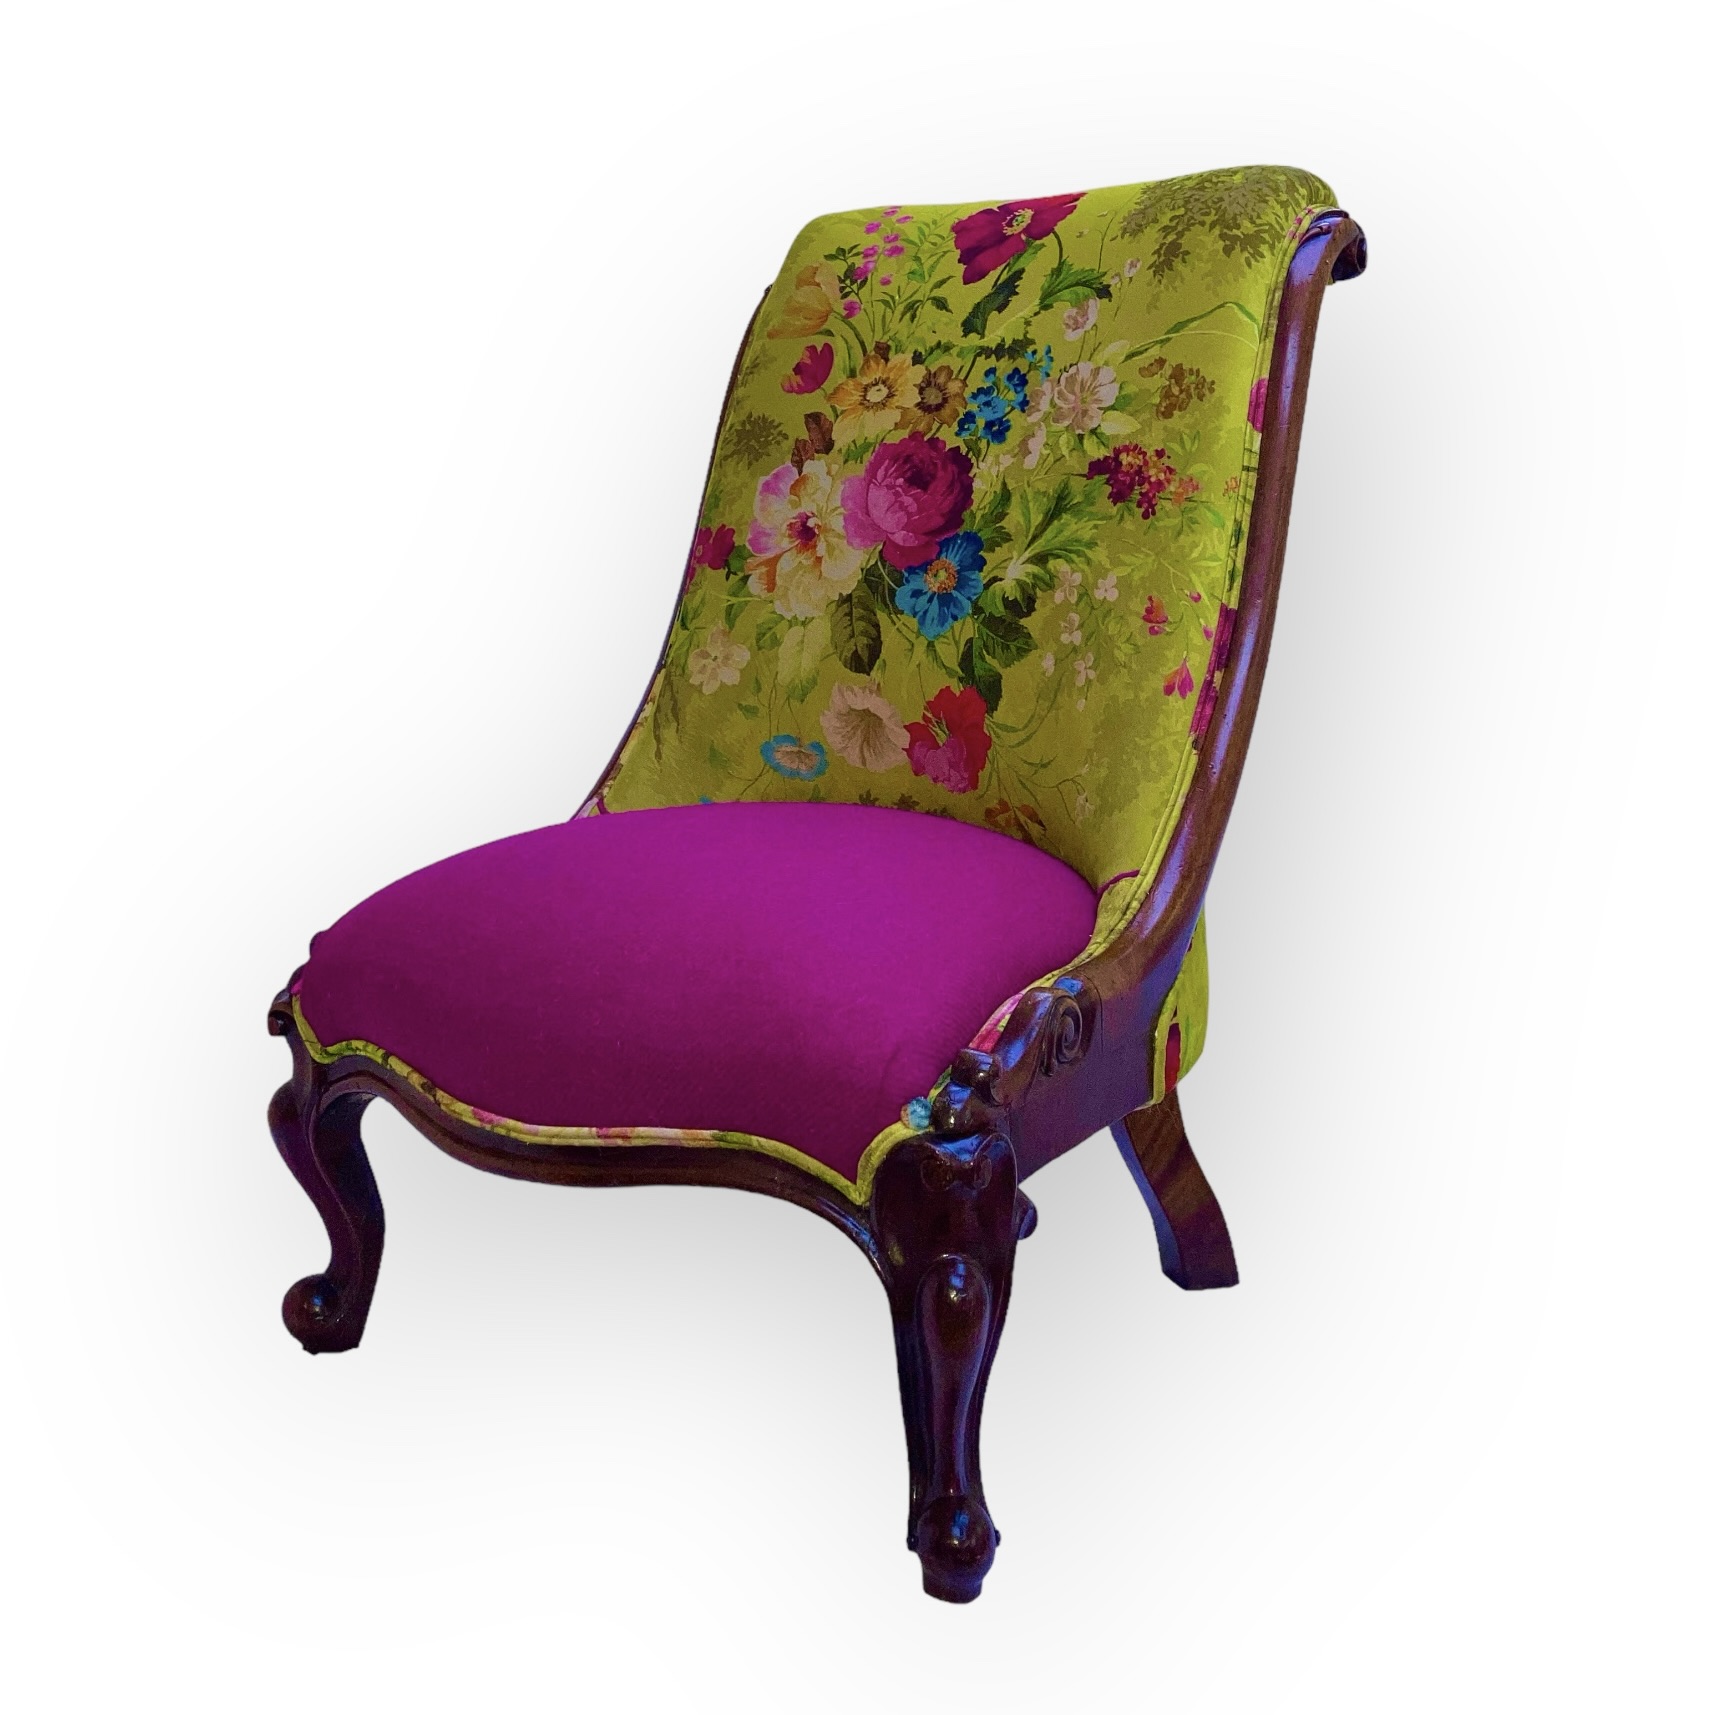 Victorian Ladies Slipper Chair In Mahogany Fully Restored And Upholstered In Spanish Alhambra Velvet And Harris Tweed